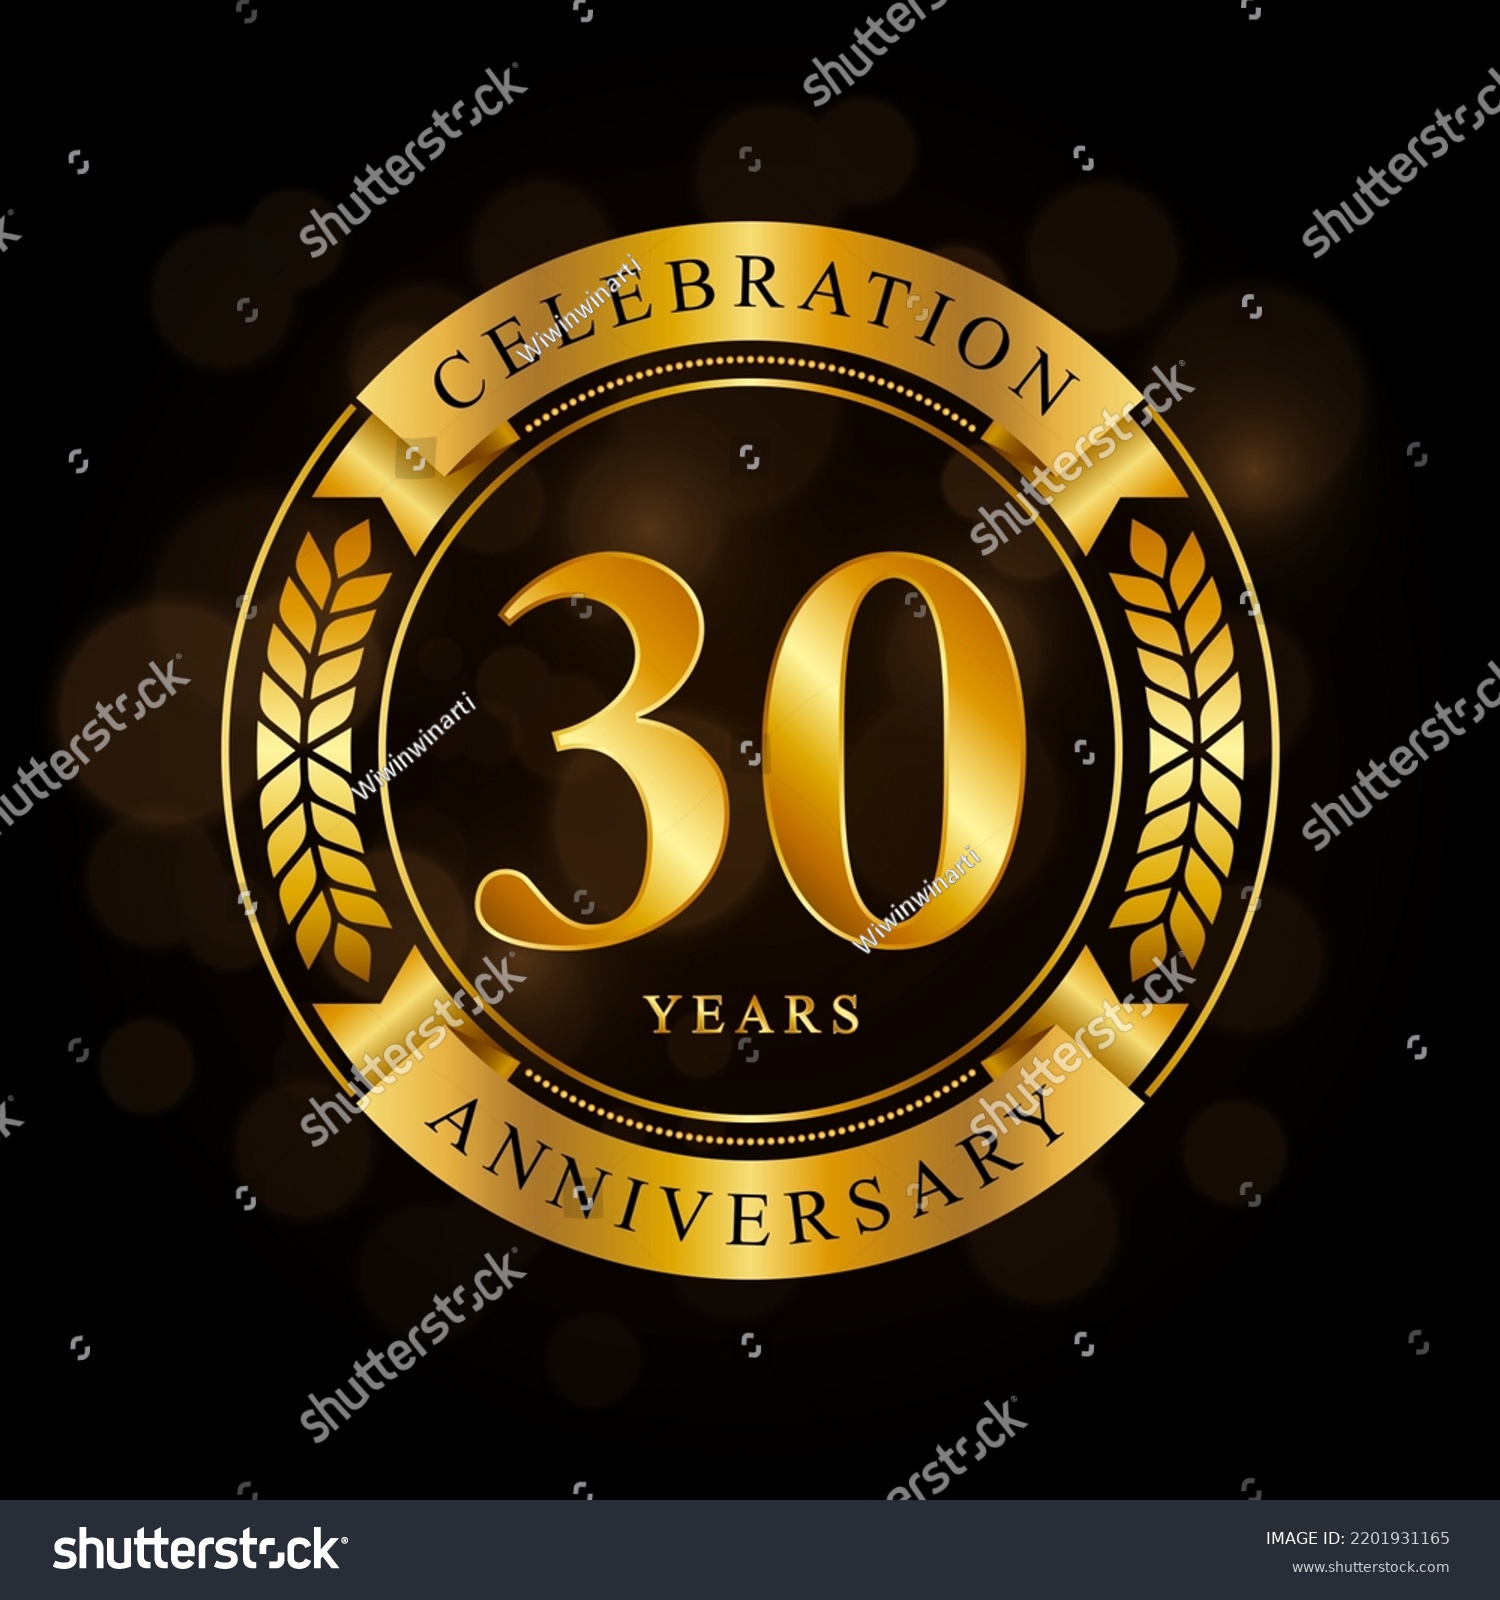 30 Year Anniversary Celebration Template Design Stock Vector (Royalty ...